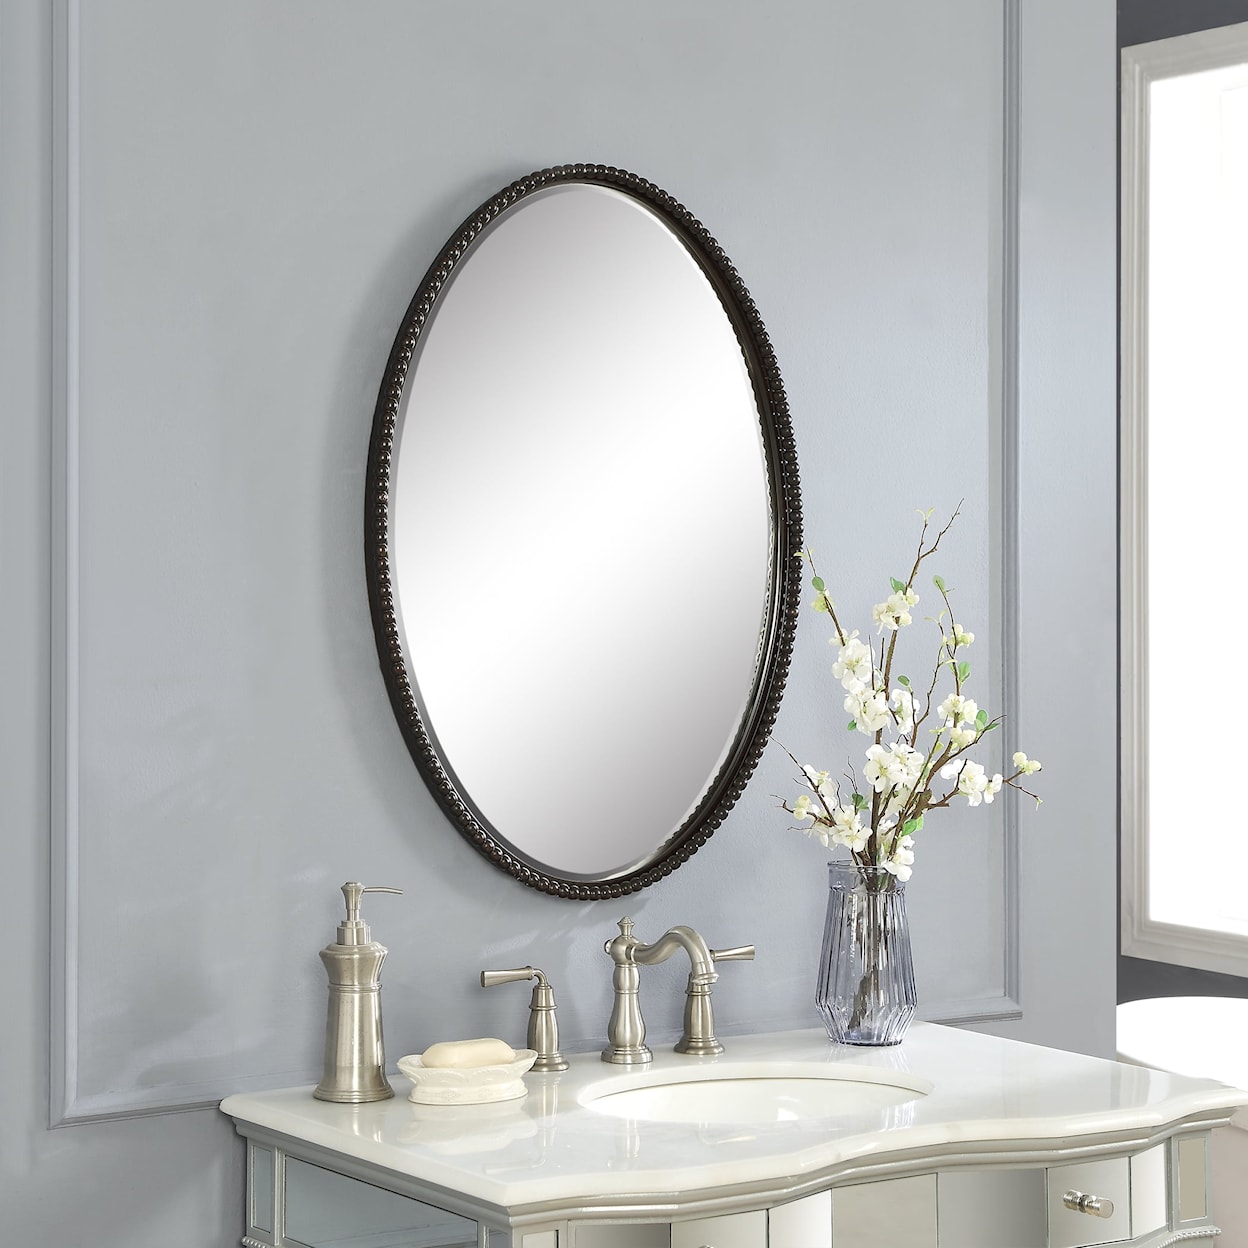 Uttermost Mirrors - Oval Sherise Bronze Oval Mirror